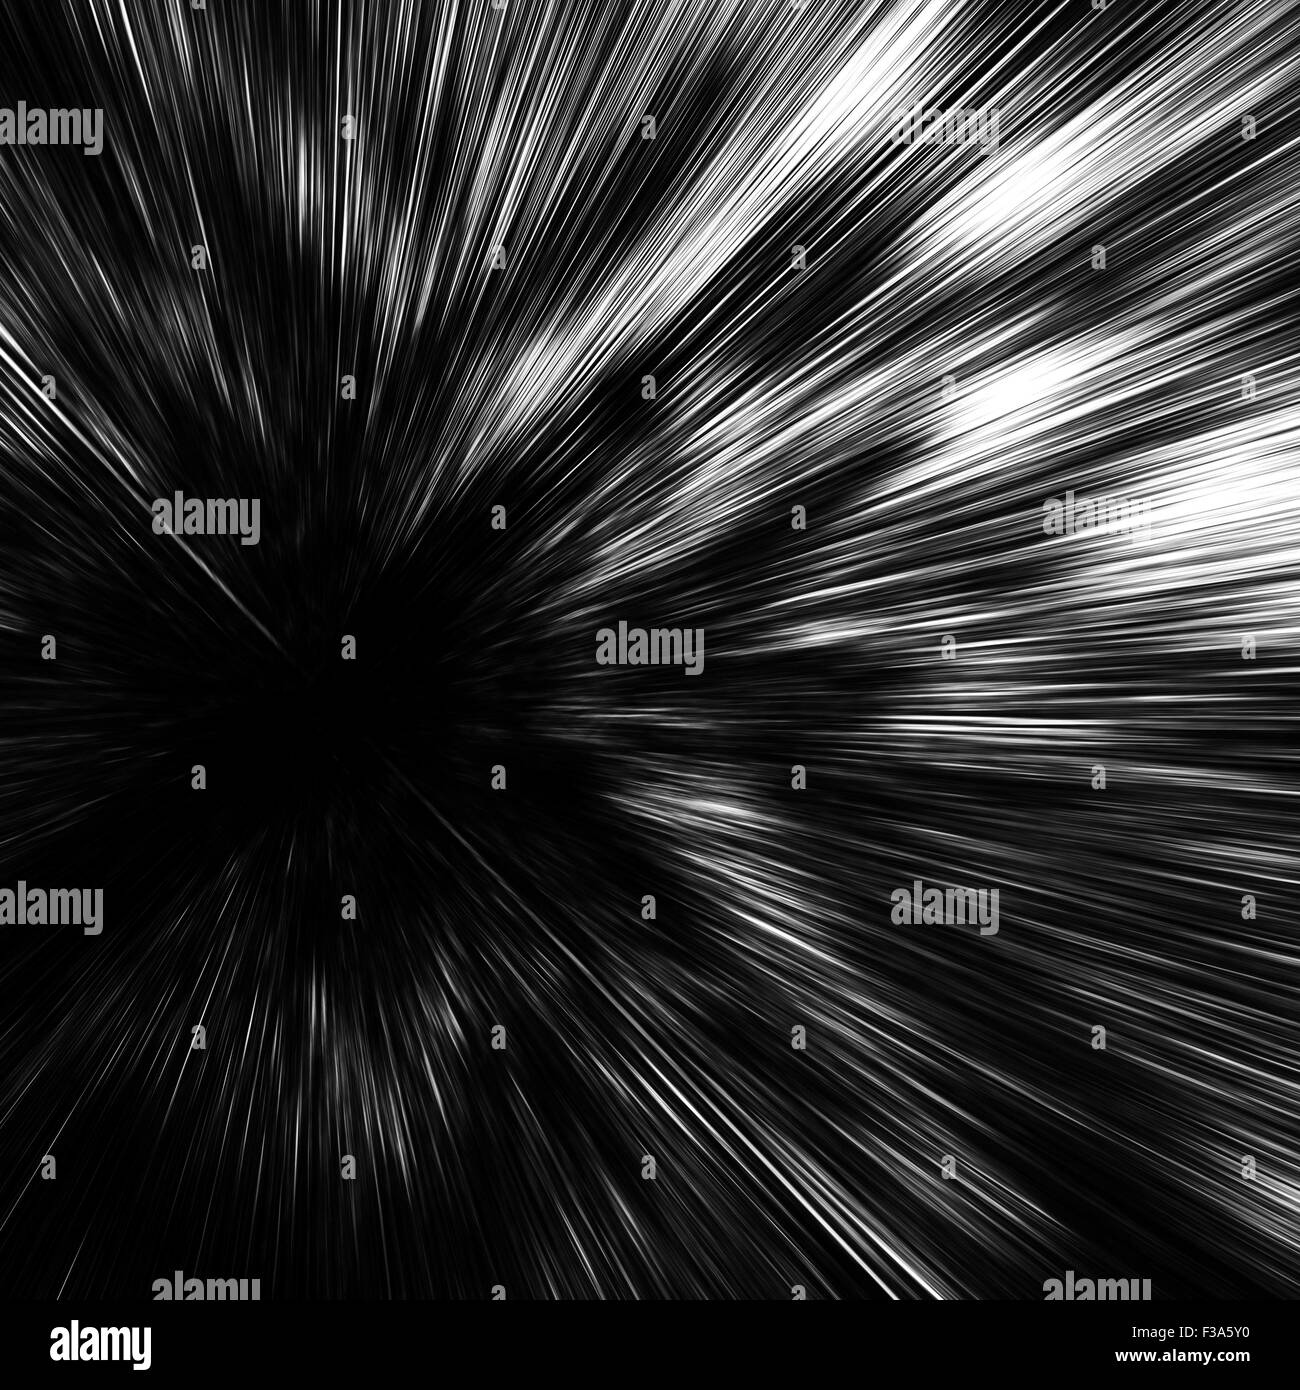 Blur effect Black and White Stock Photos & Images - Alamy